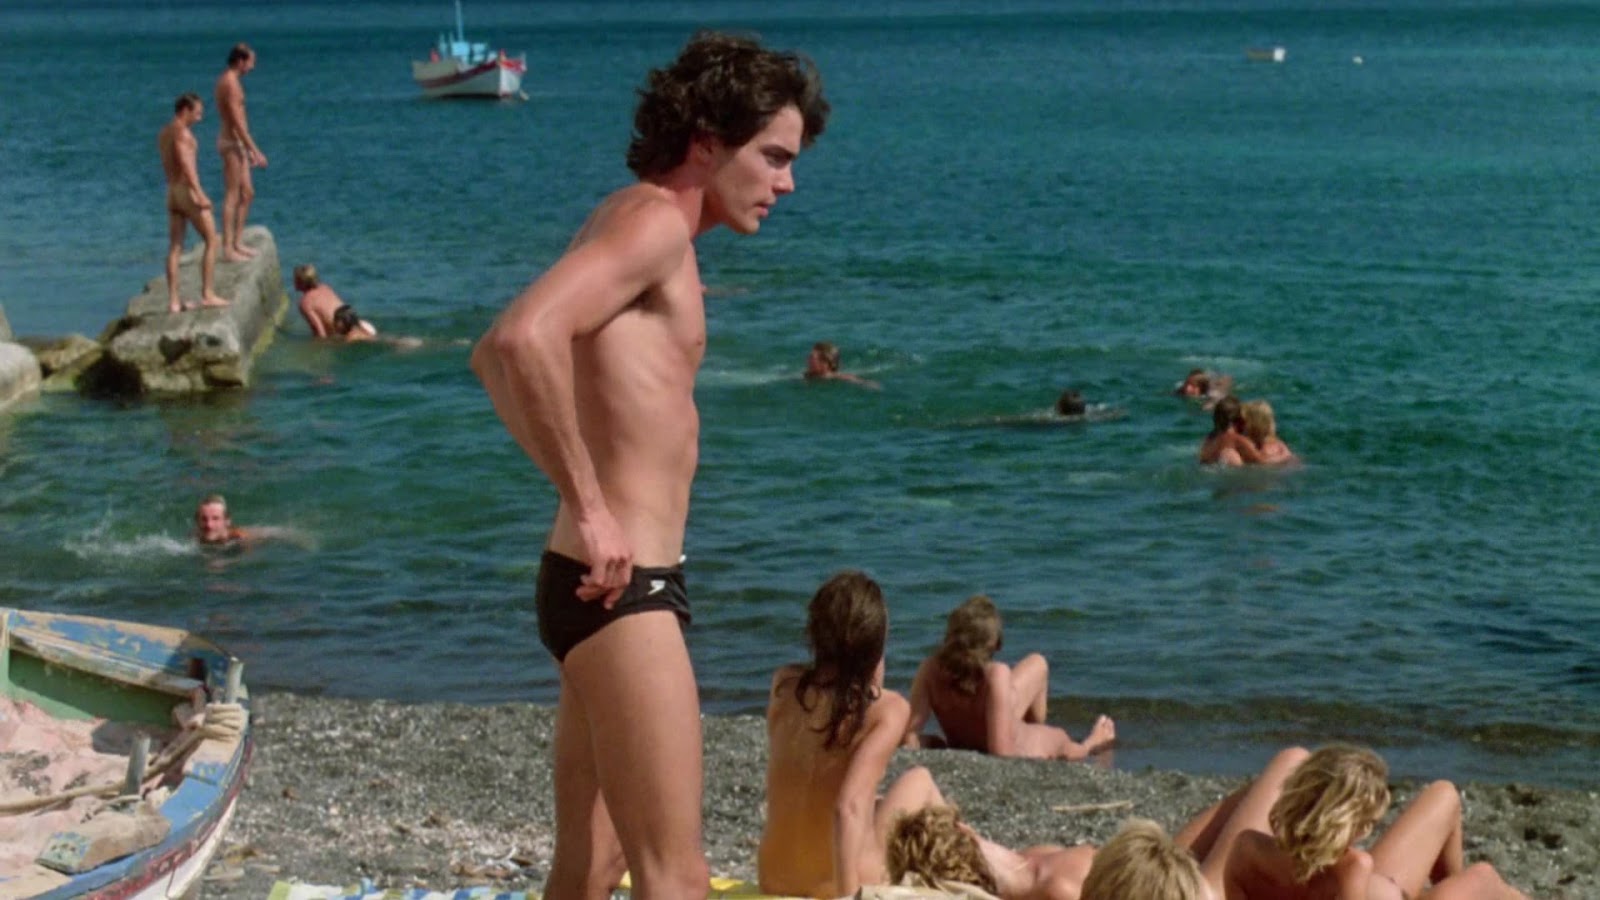 Peter Gallagher nude in Summer Lovers.